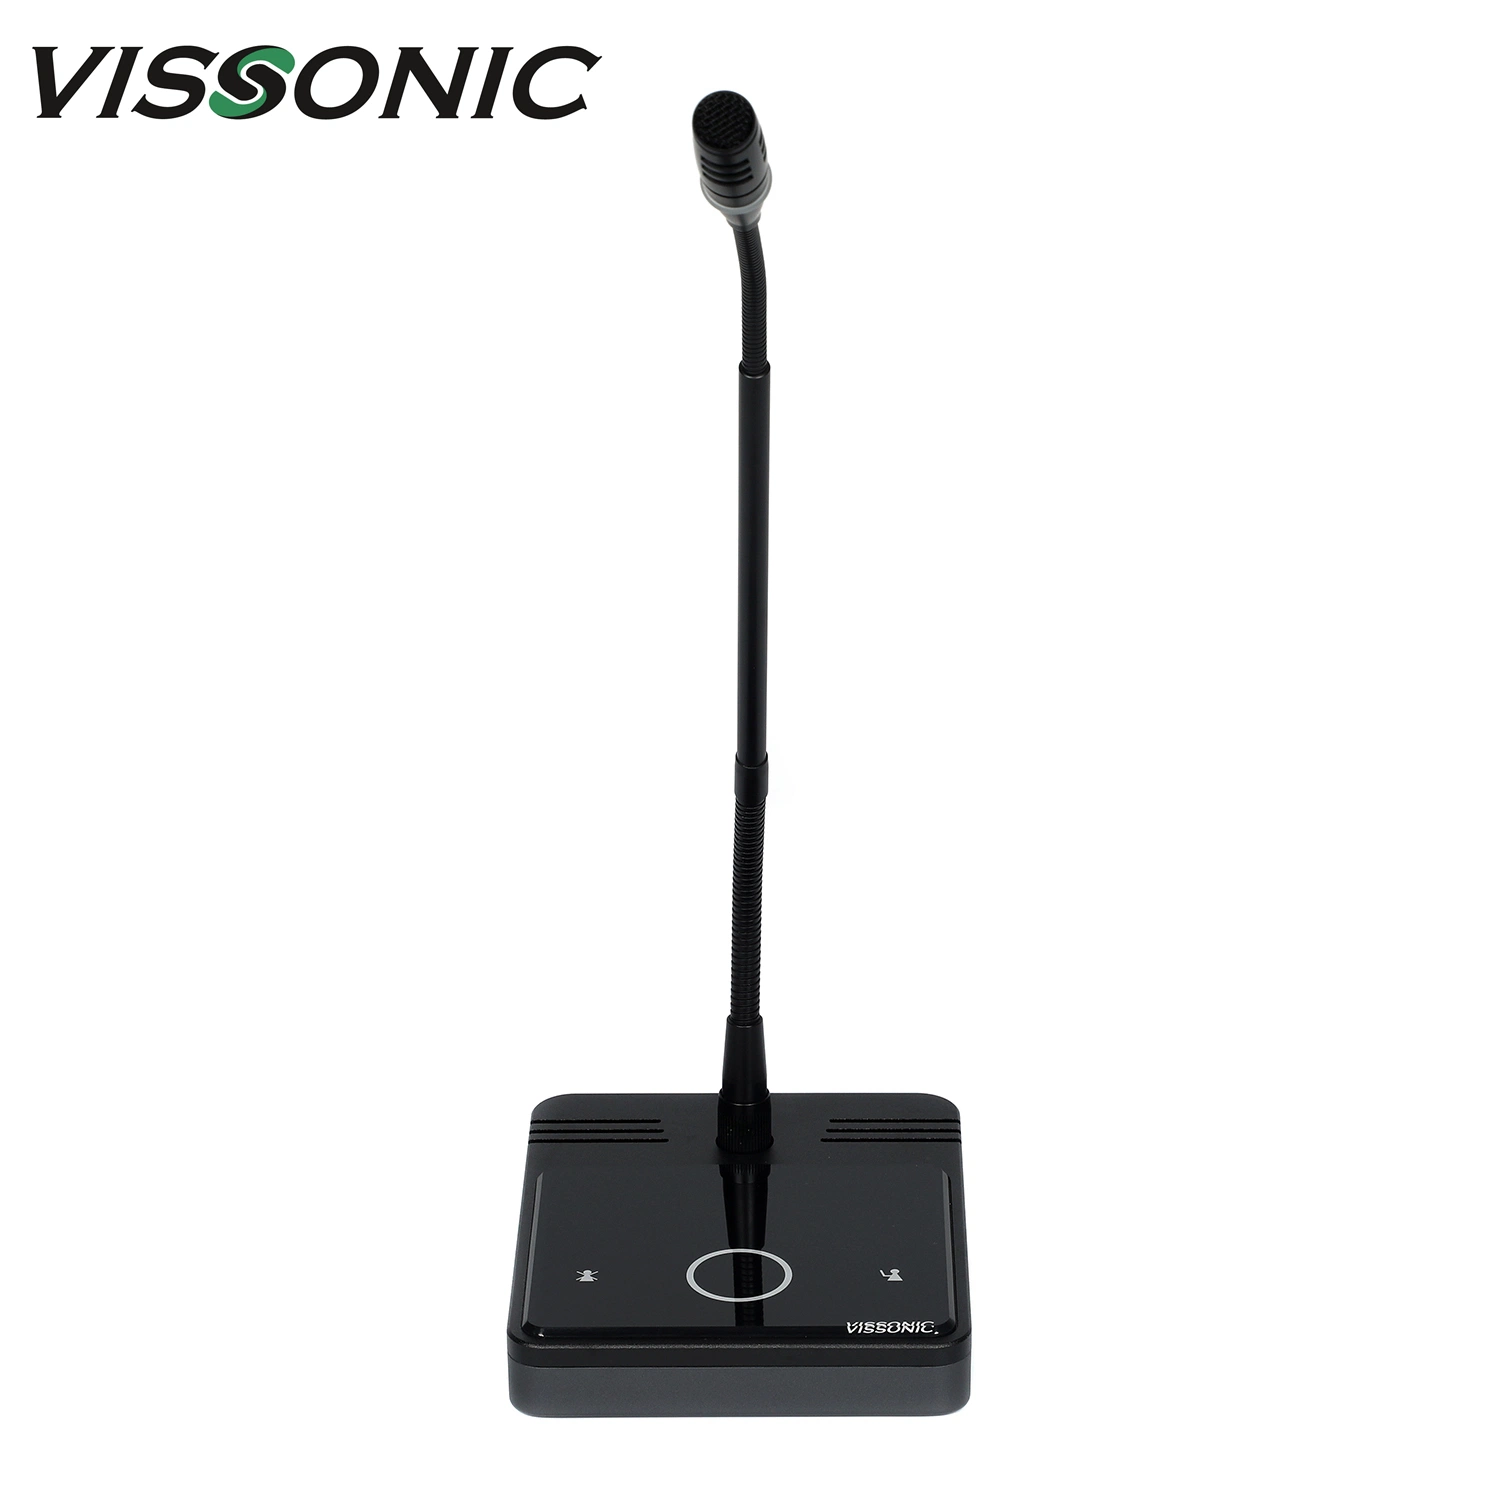 Full Digital Network Audio Classic Conference System Microphones with Touch Button